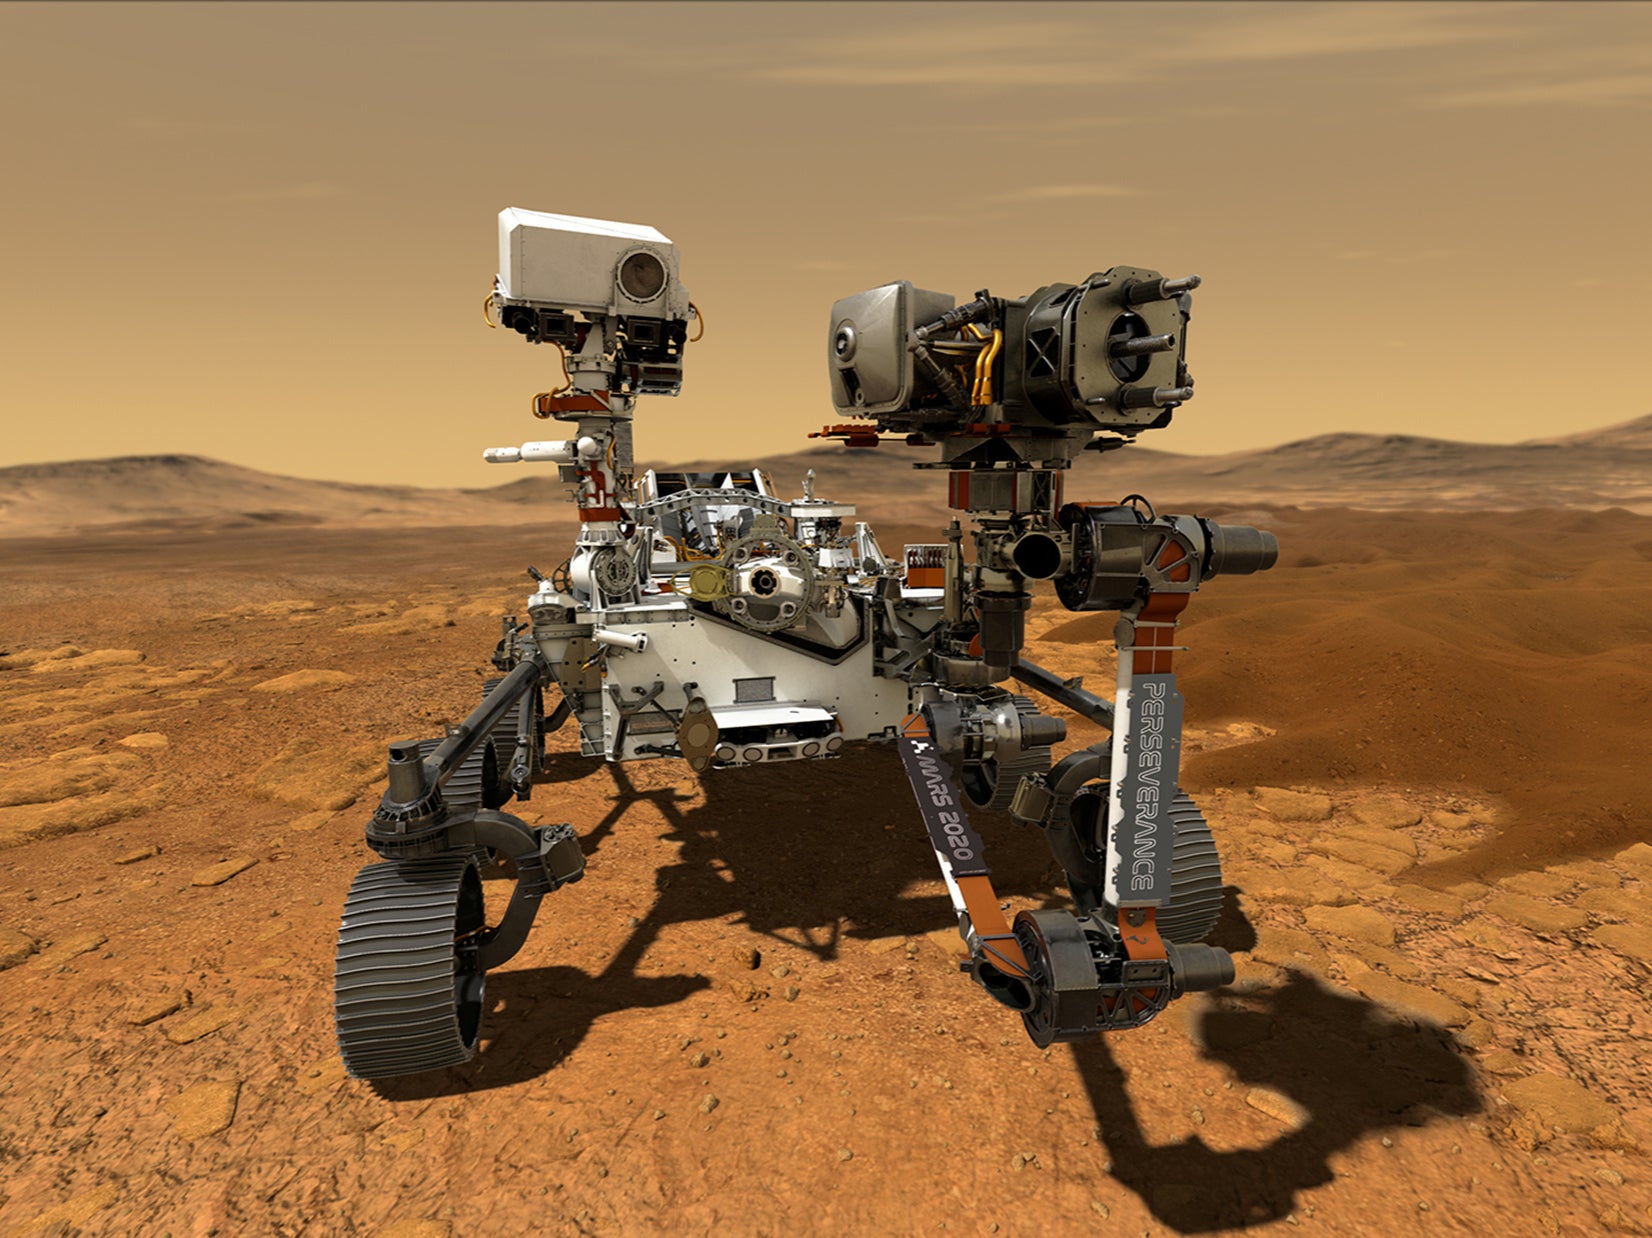 NASA's Perseverance Mars rover, the biggest, heaviest, most advanced vehicle sent to the Red Planet by the National Aeronautics and Space Administration